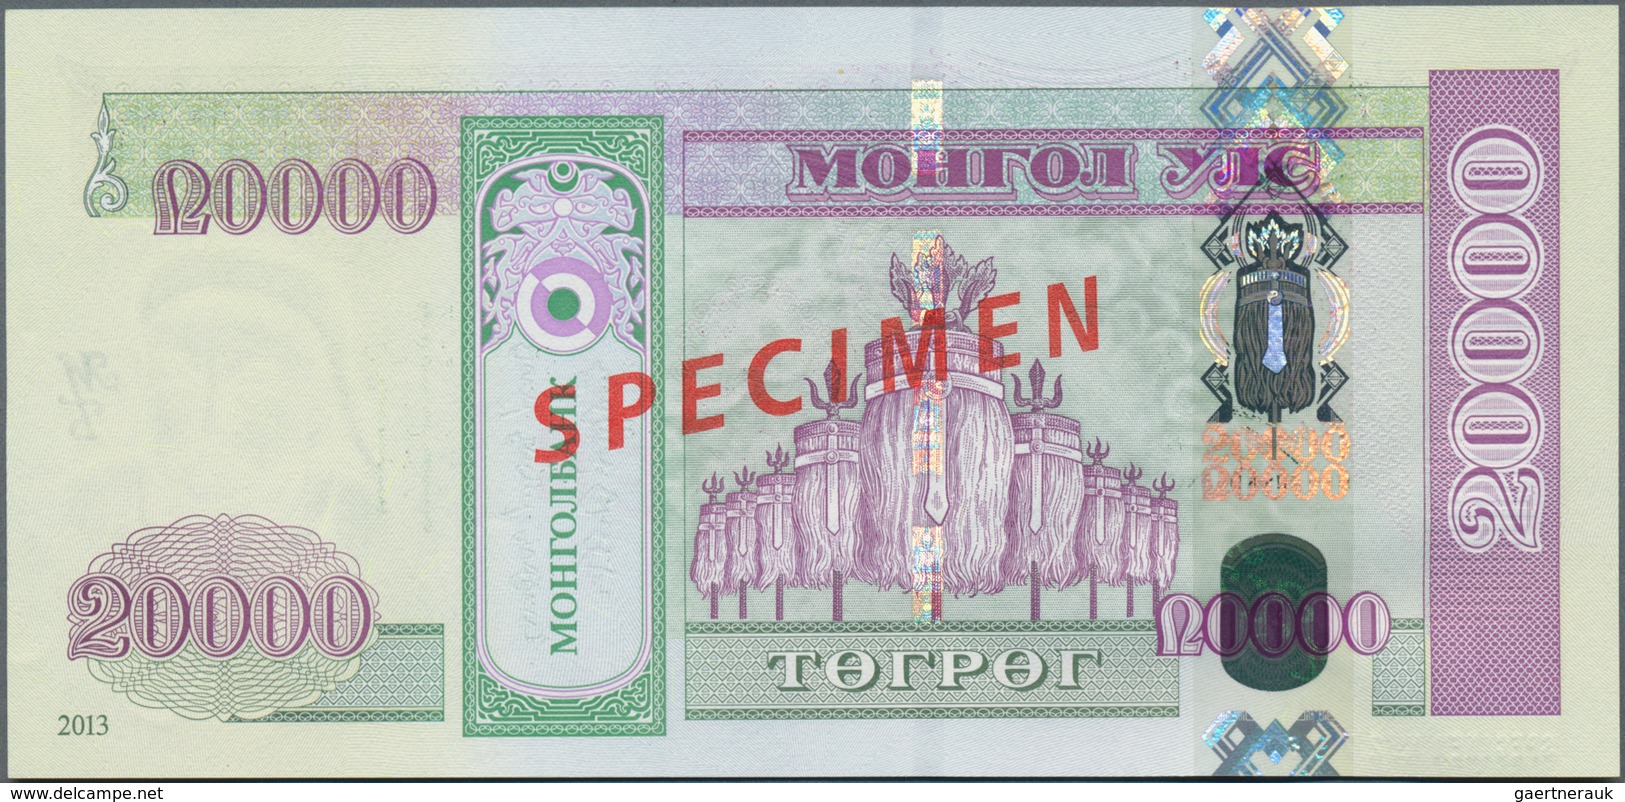 Mongolia / Mongolei: Highly Rare Specimen set with 9 banknotes comprising 10 and 20 Tugrik 2011 Spec